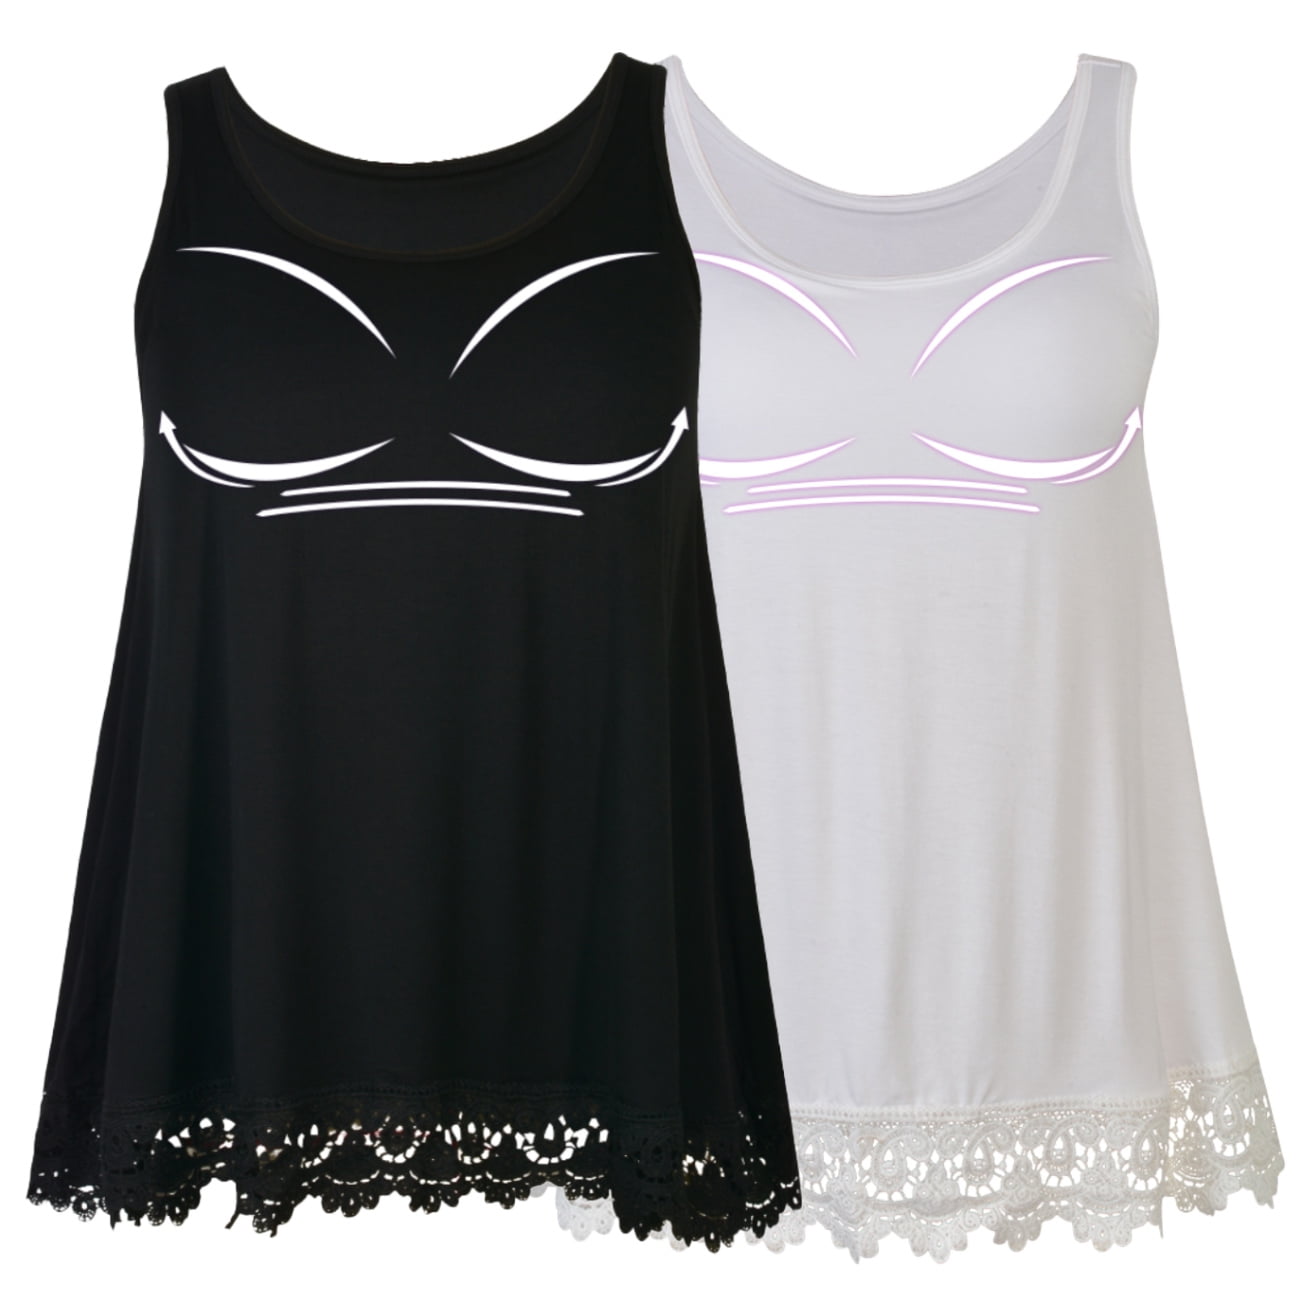 Anyfit Wear 2 Packs Lace Camisoles for Women with Built in Bra